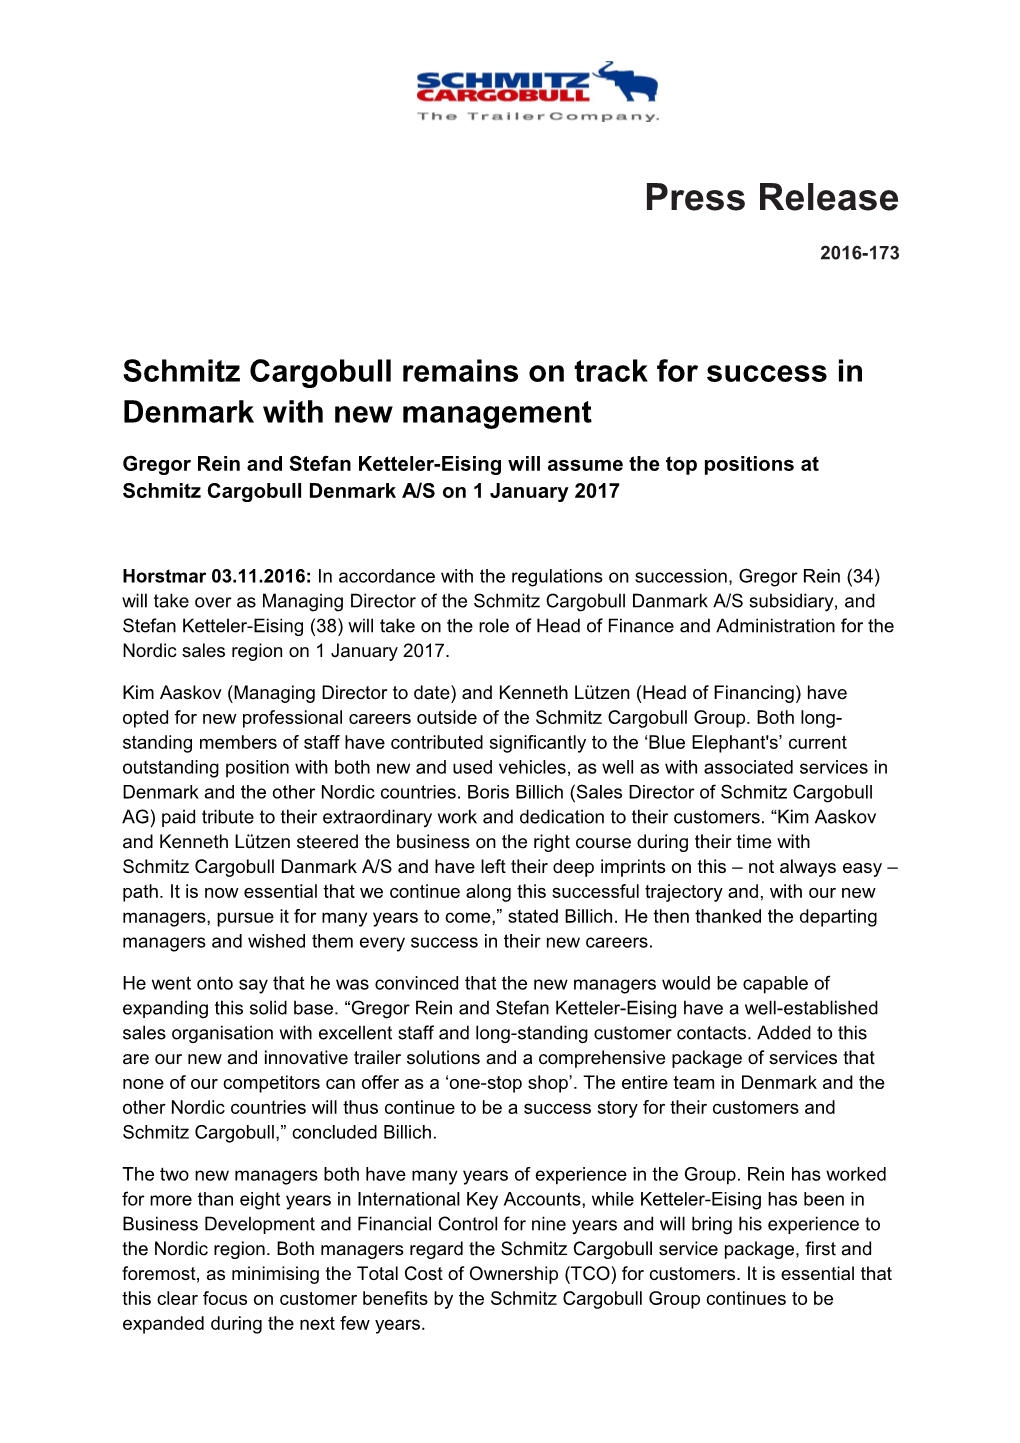 Schmitz Cargobull Remains on Track for Success in Denmark with New Management